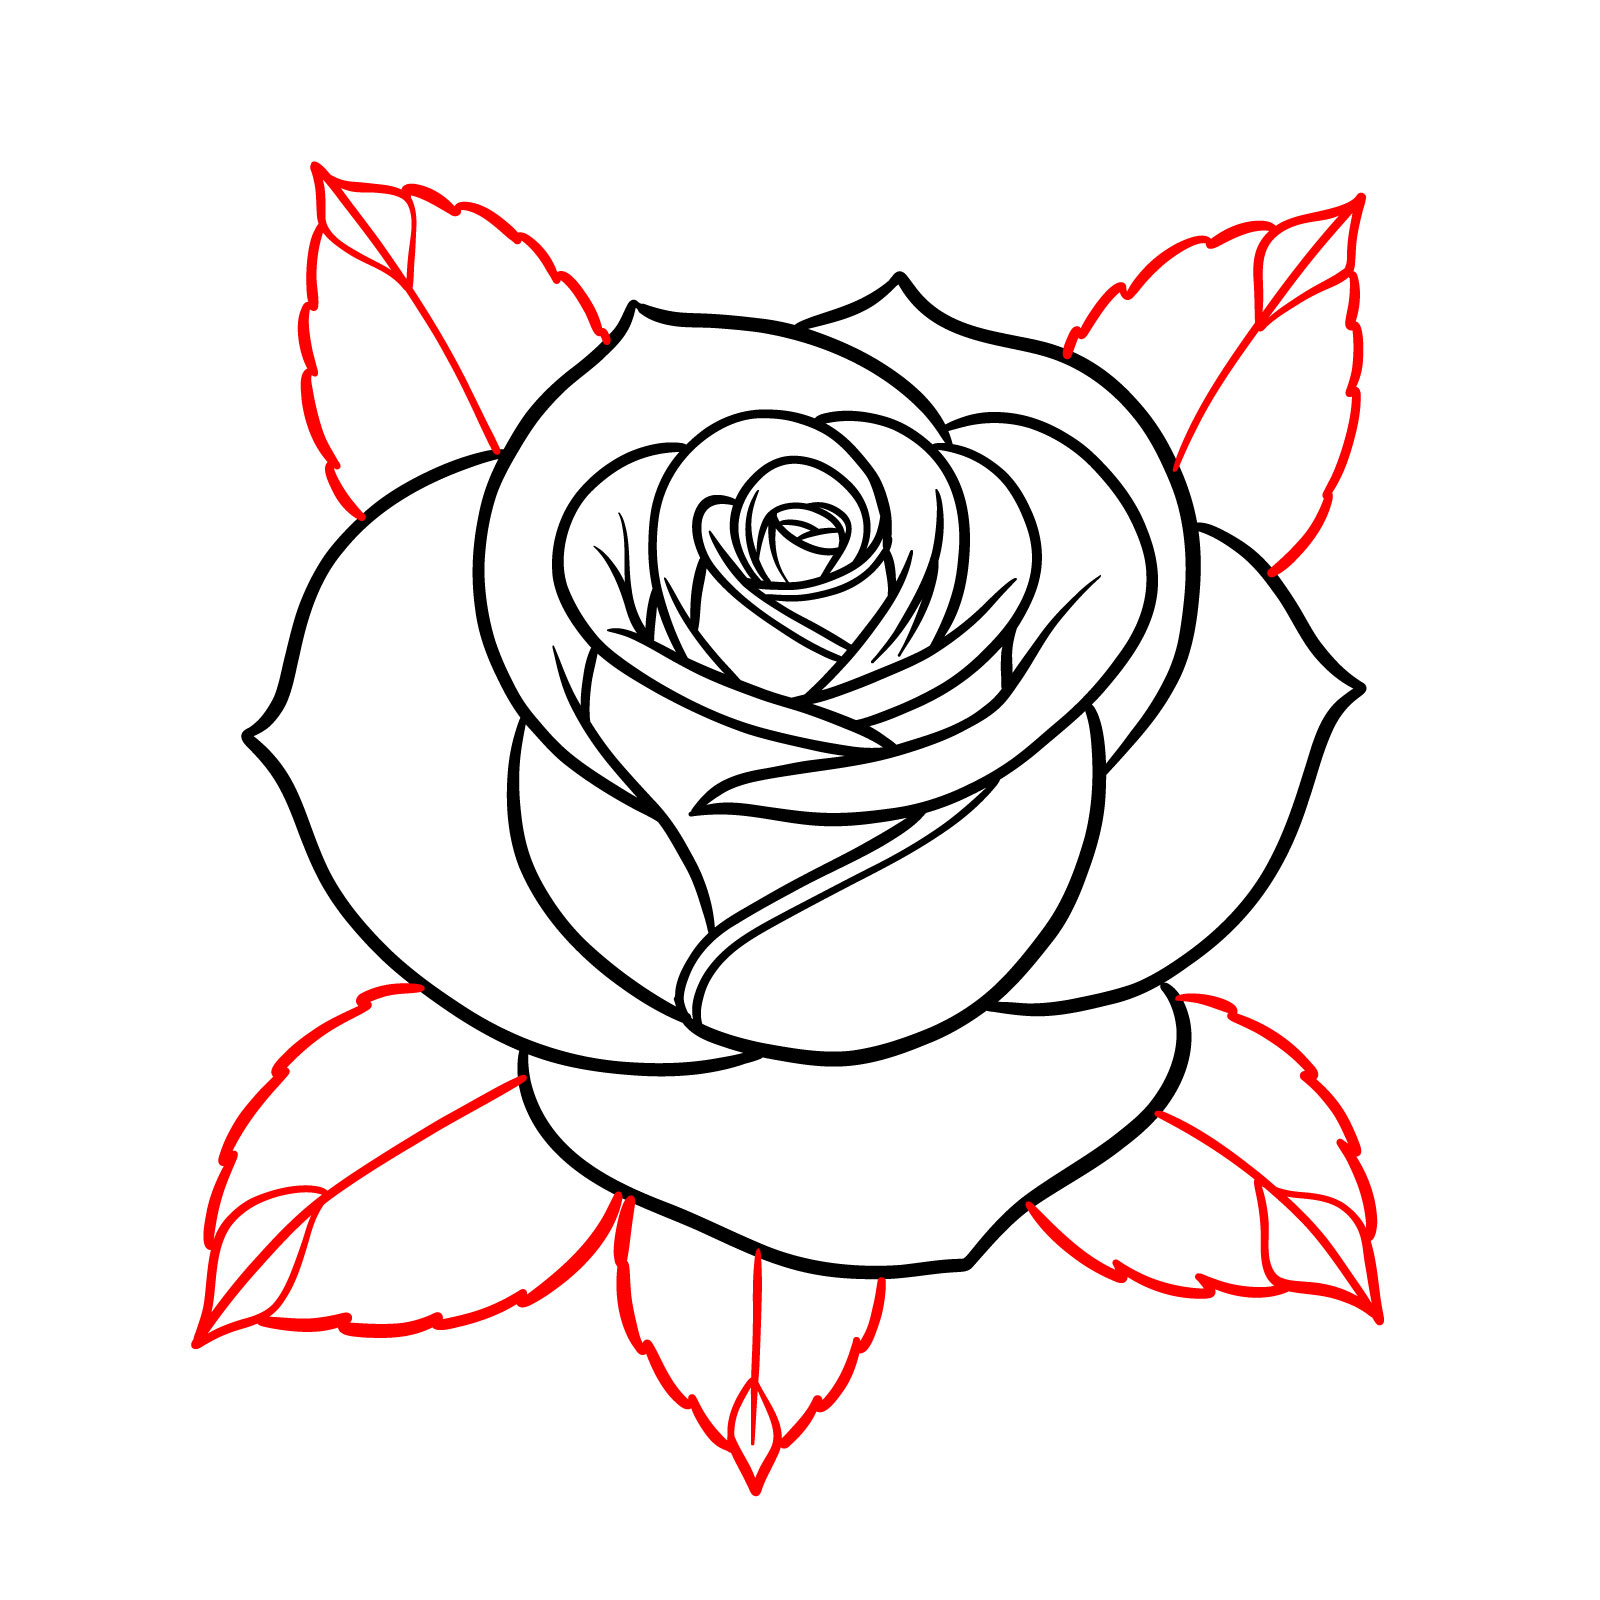 How to Draw a Rose: Easy Flower Drawings